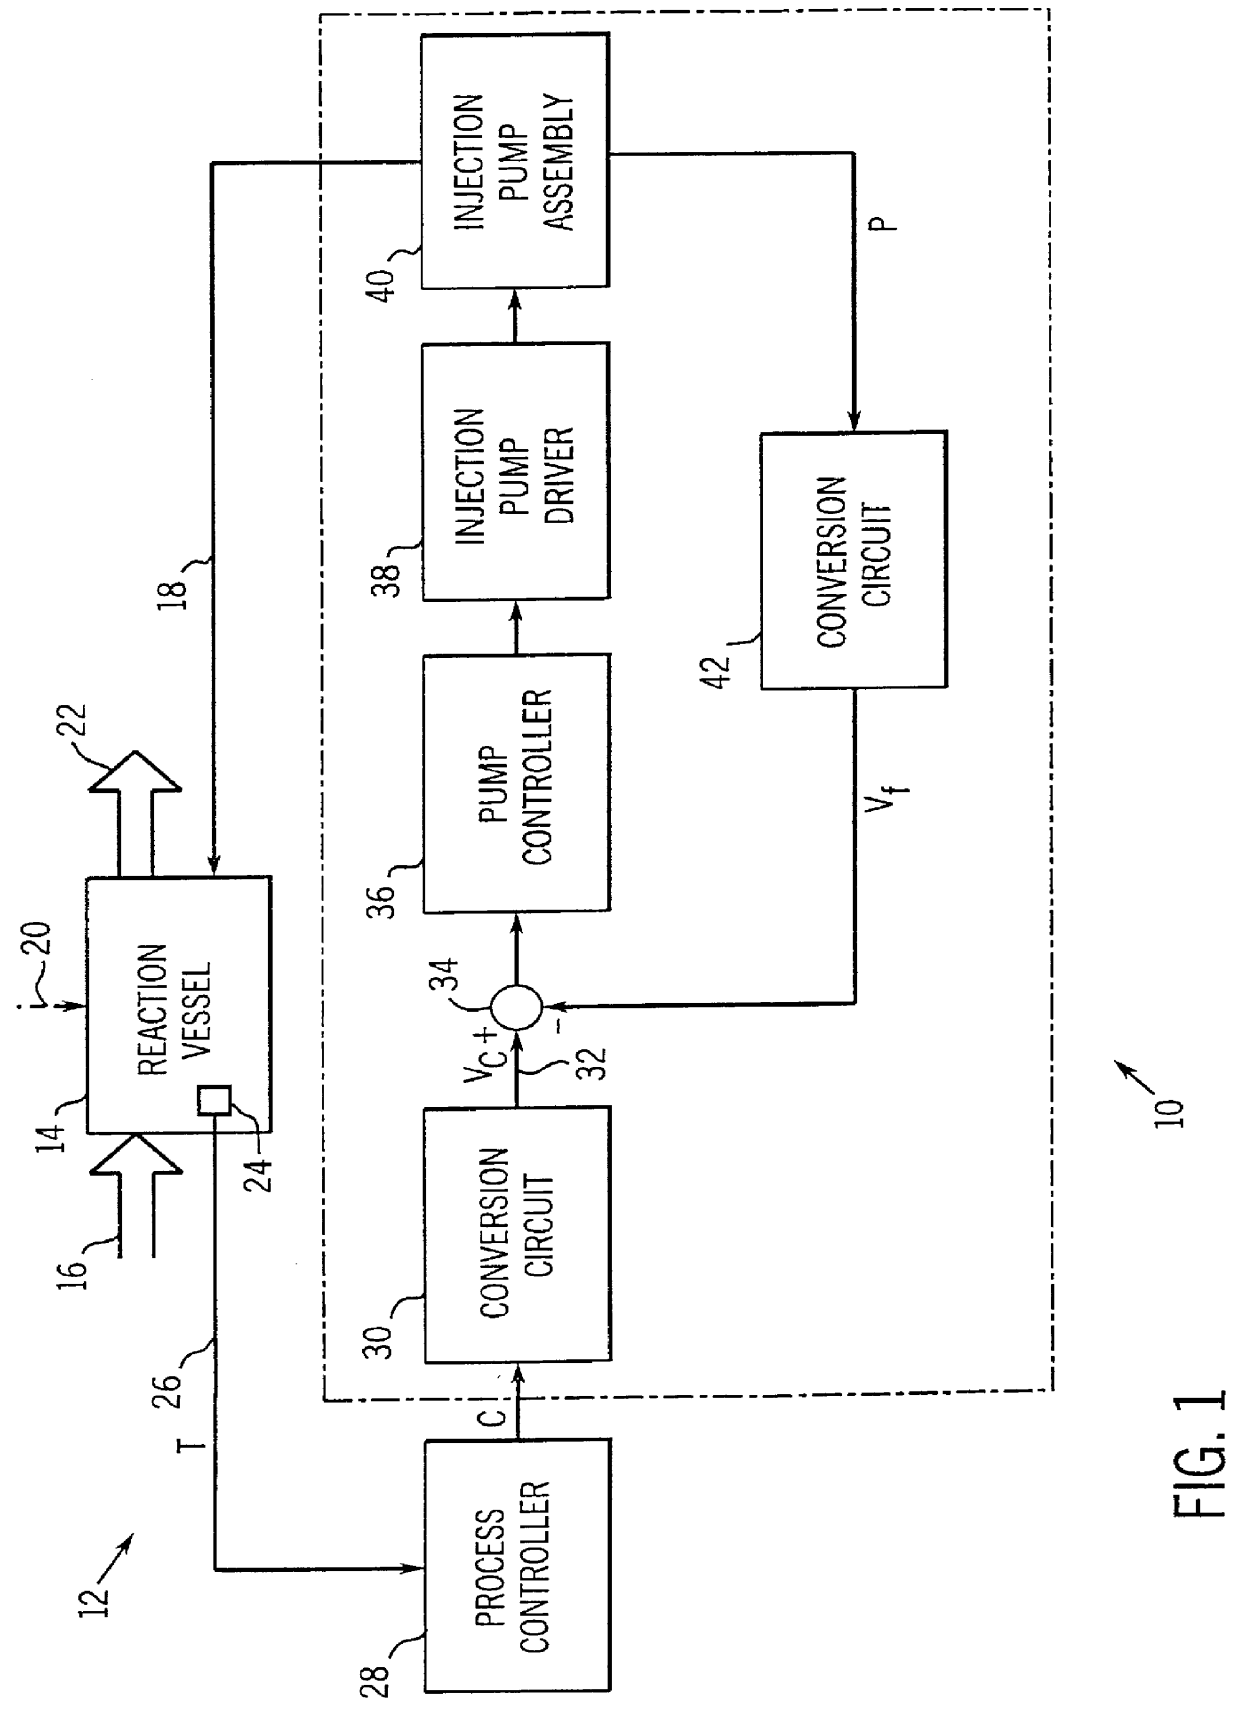 Method and apparatus for metering multiple injection pump flow